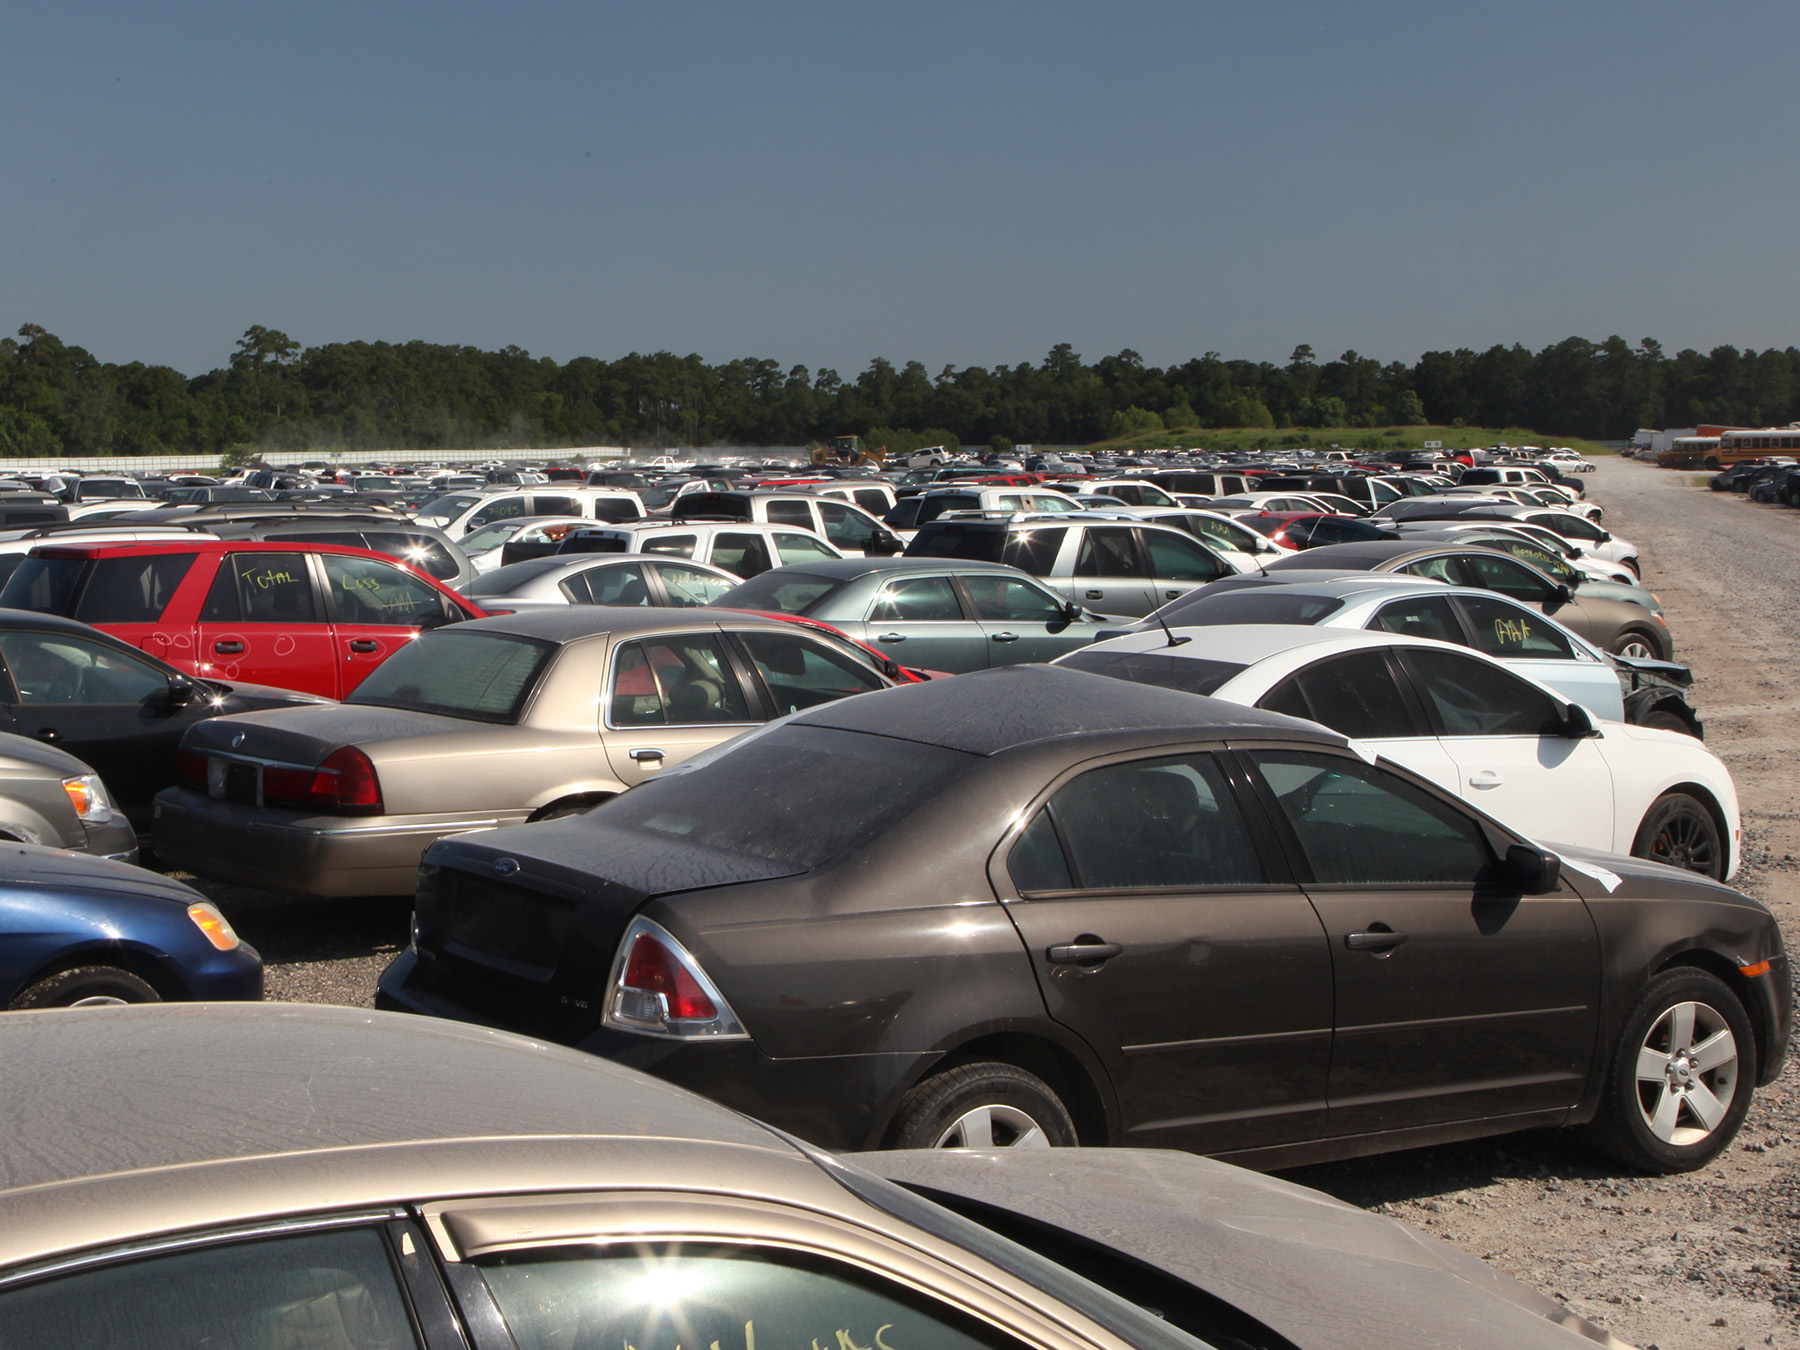 Thousands of cars await their fate